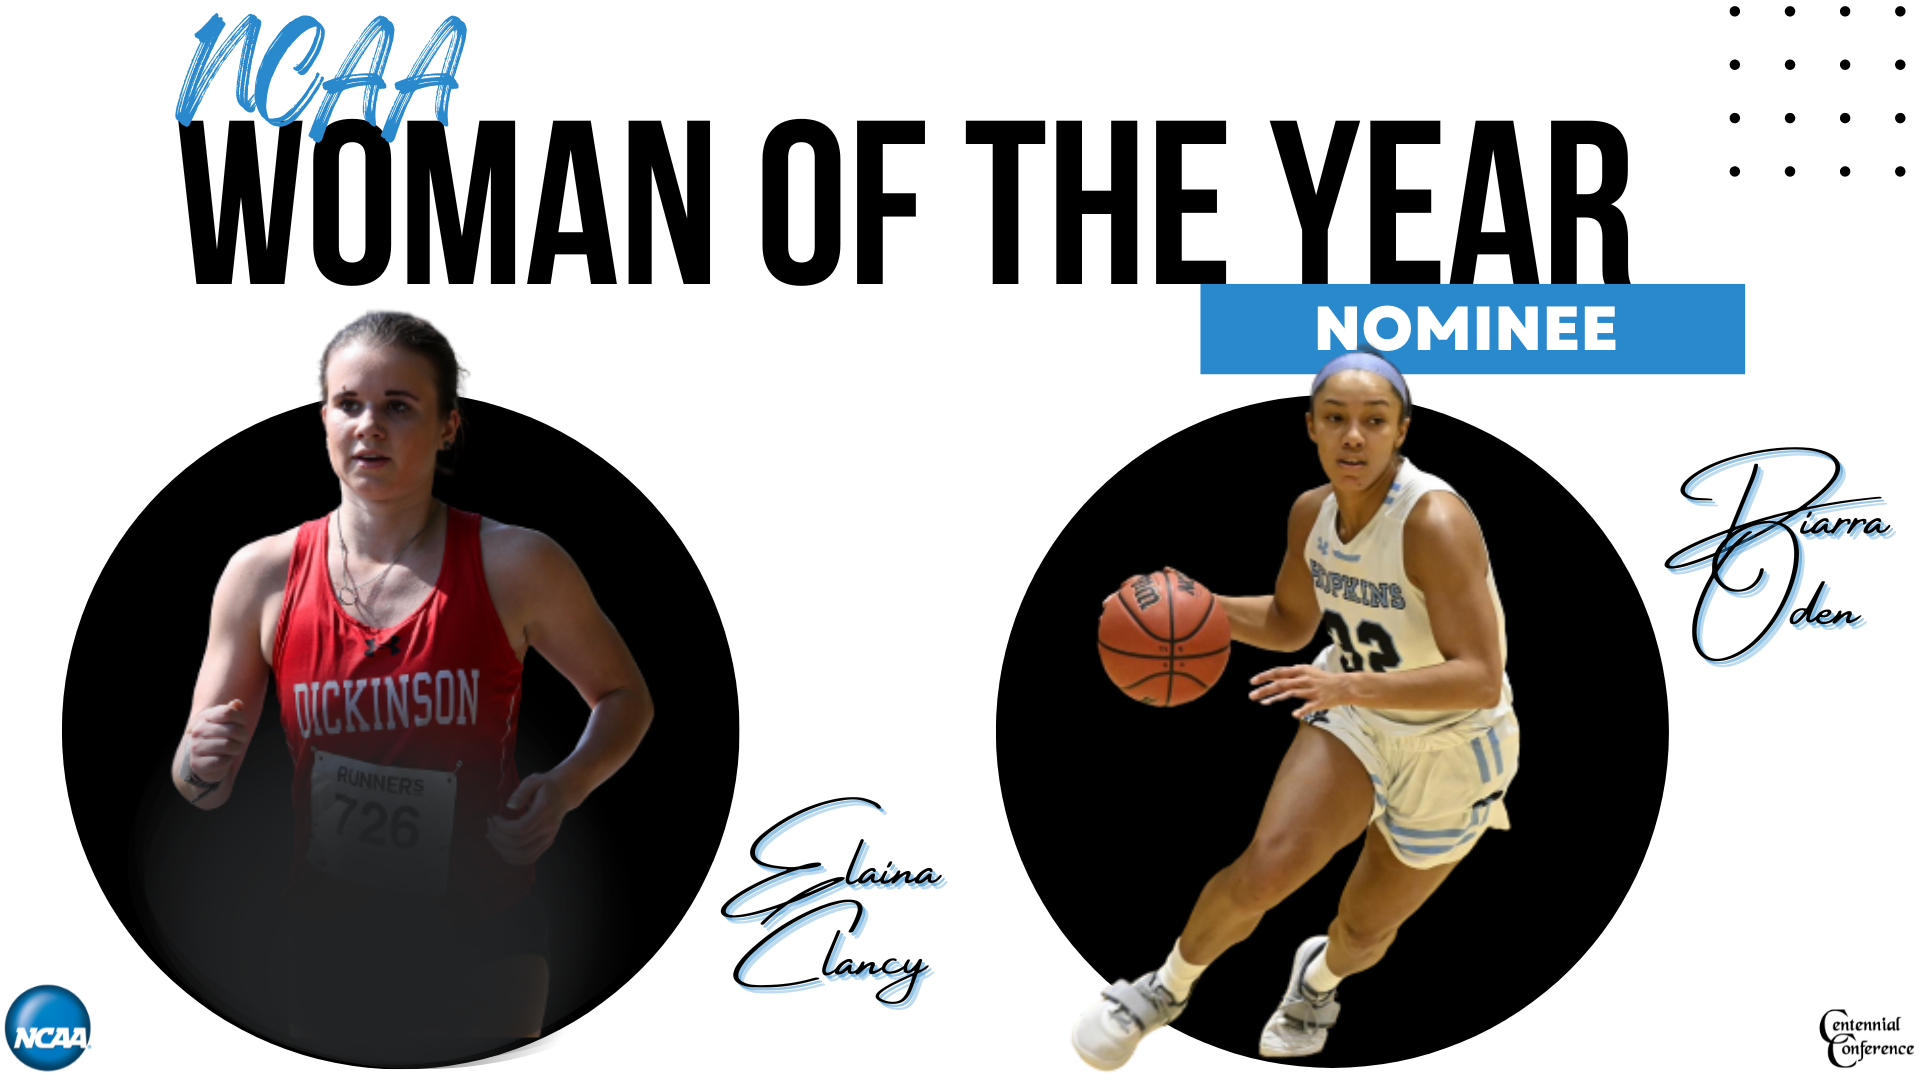 Dickinson's Clancy & JHU's Oden Selected as Centennial Nominees for NCAA Woman of the Year